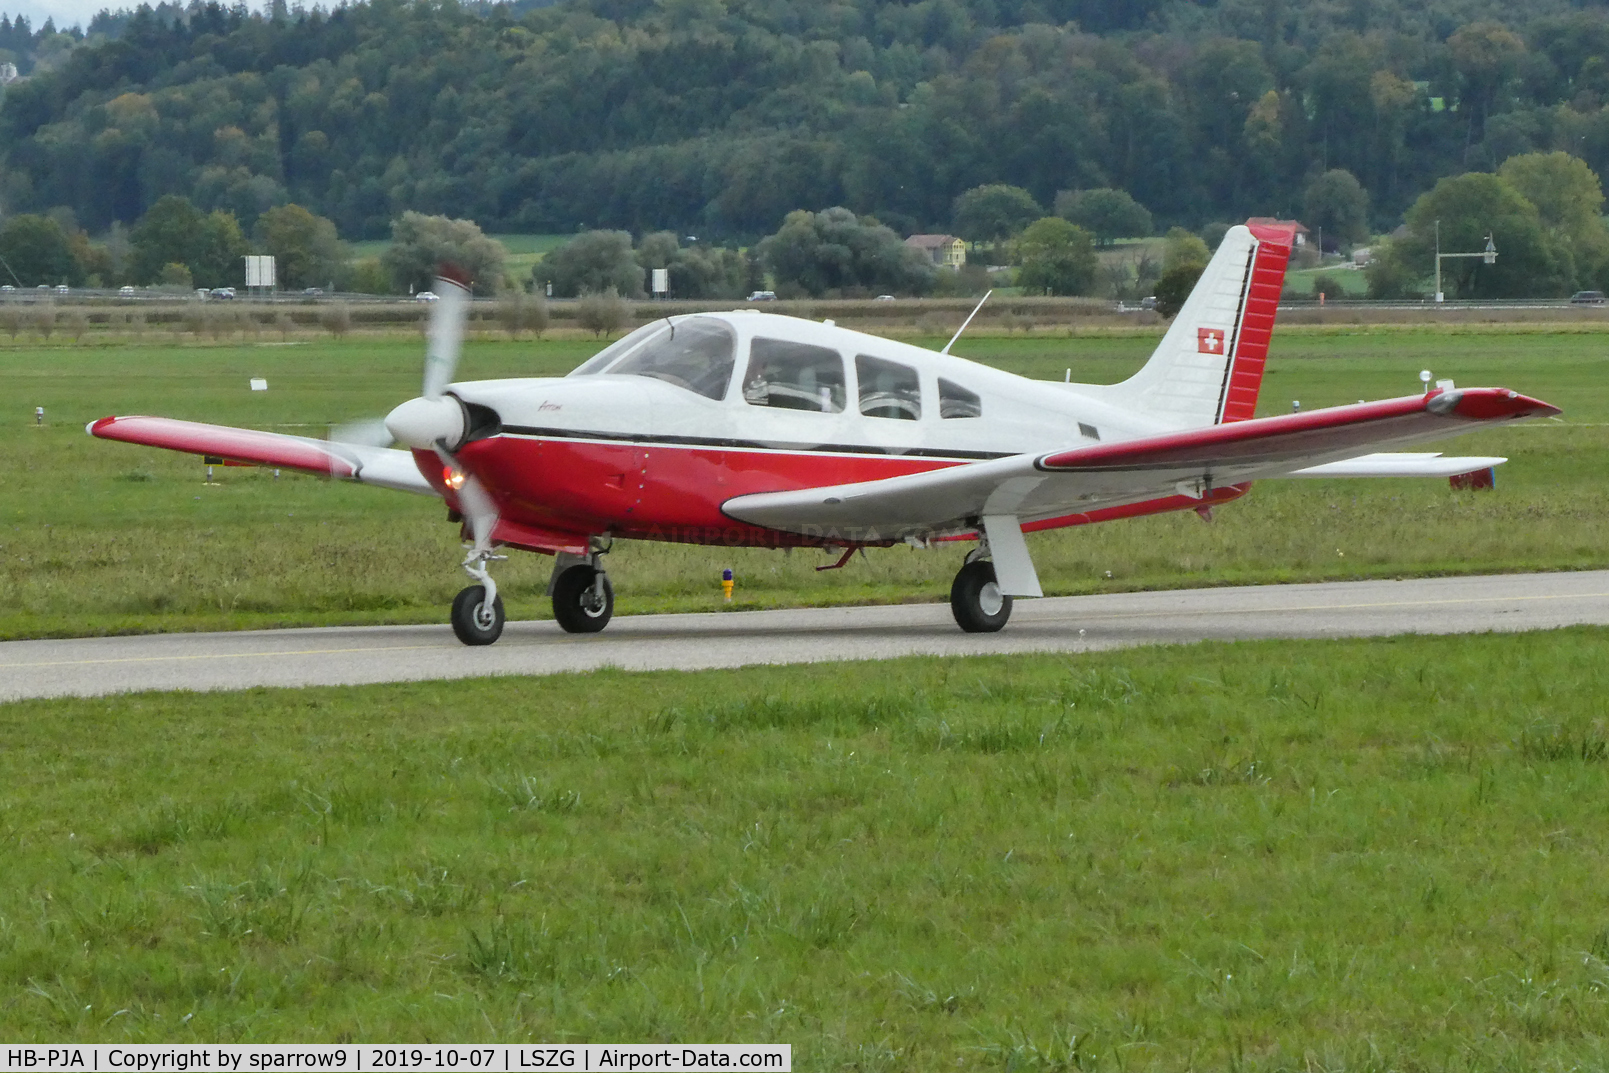 HB-PJA, 2002 Piper PA-28R-201 Cherokee Arrow III C/N 28-44089, Just landed rwy 25 at Grenchen